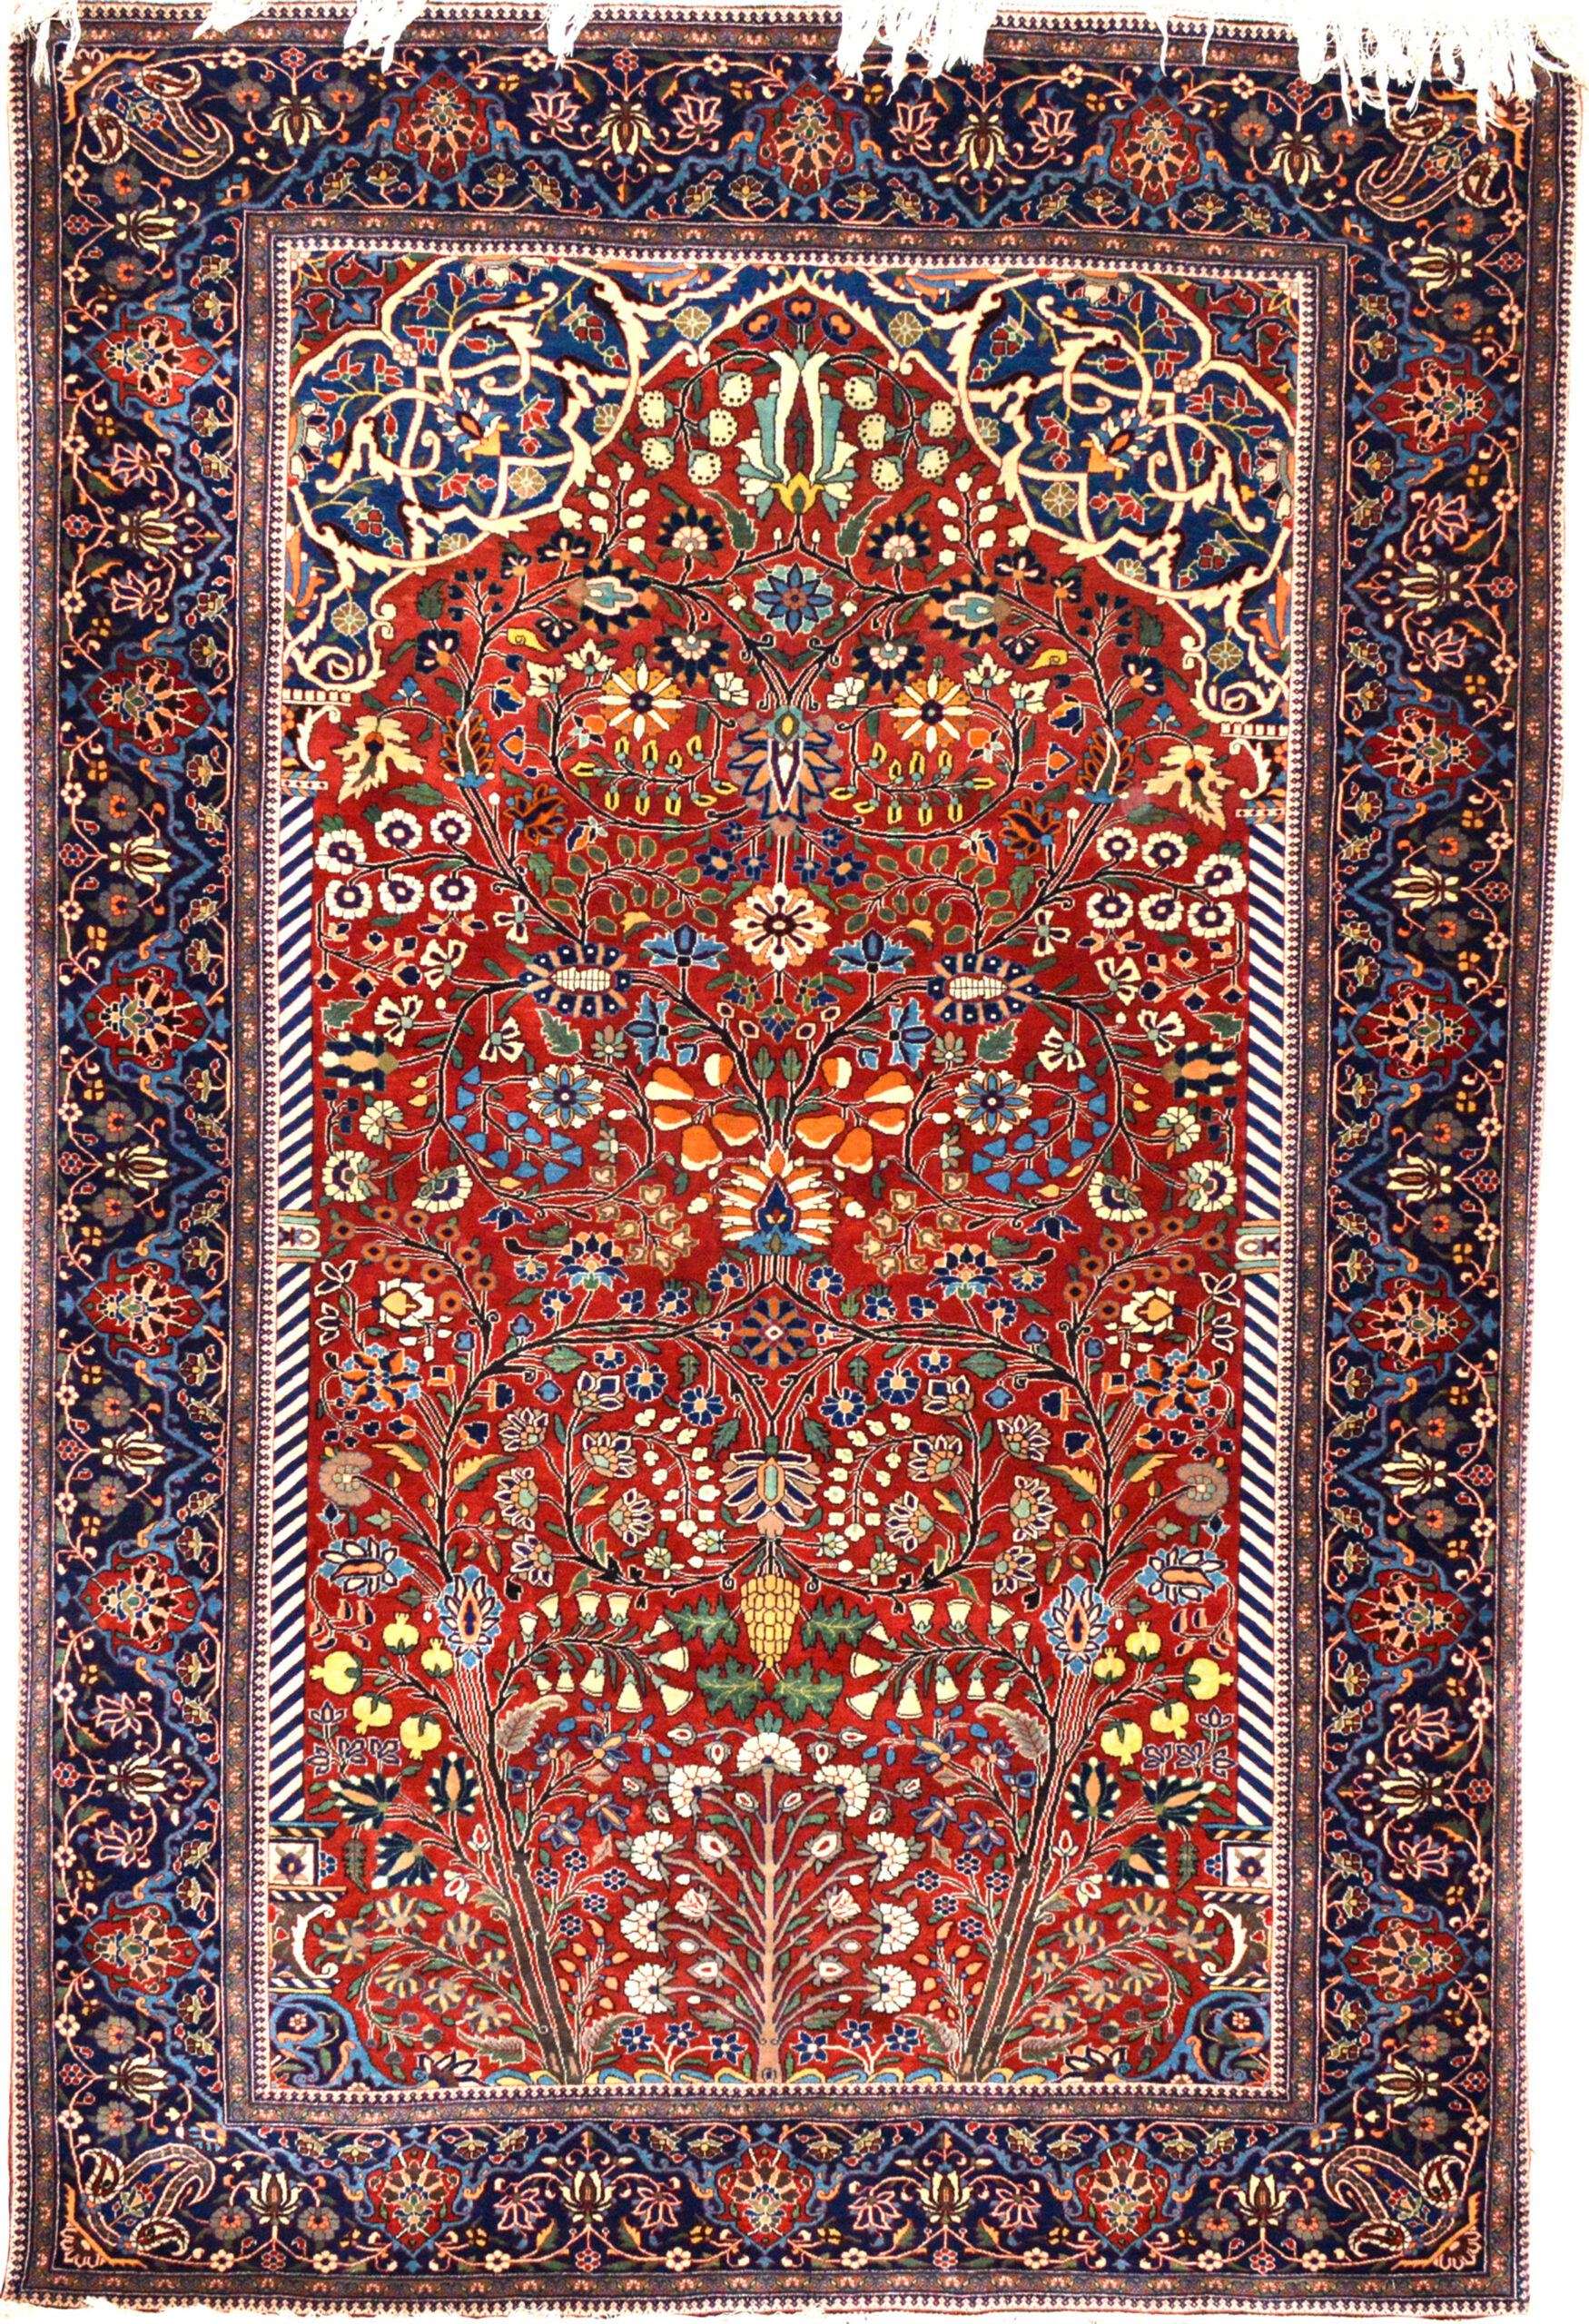 Antique Persian Mohtasham Kashan rug with a directional floral design on a brick red field, Douglas Stock Gallery, antique rugs Boston,MA area